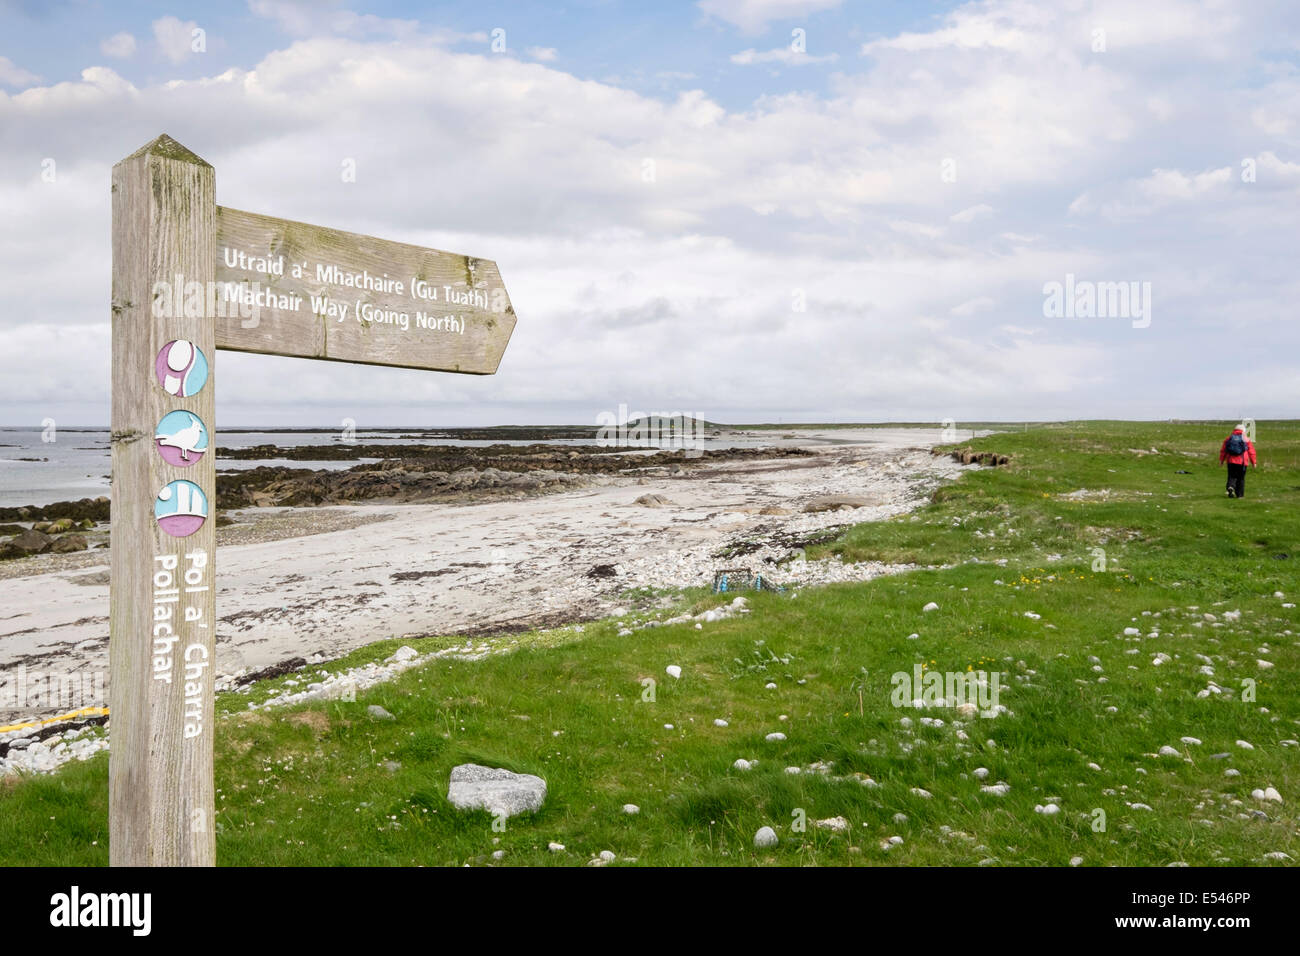 Machair Way walk signpost with walker going north on coast near Pollachar South Uist Outer Hebrides Western Isles Scotland UK Stock Photo